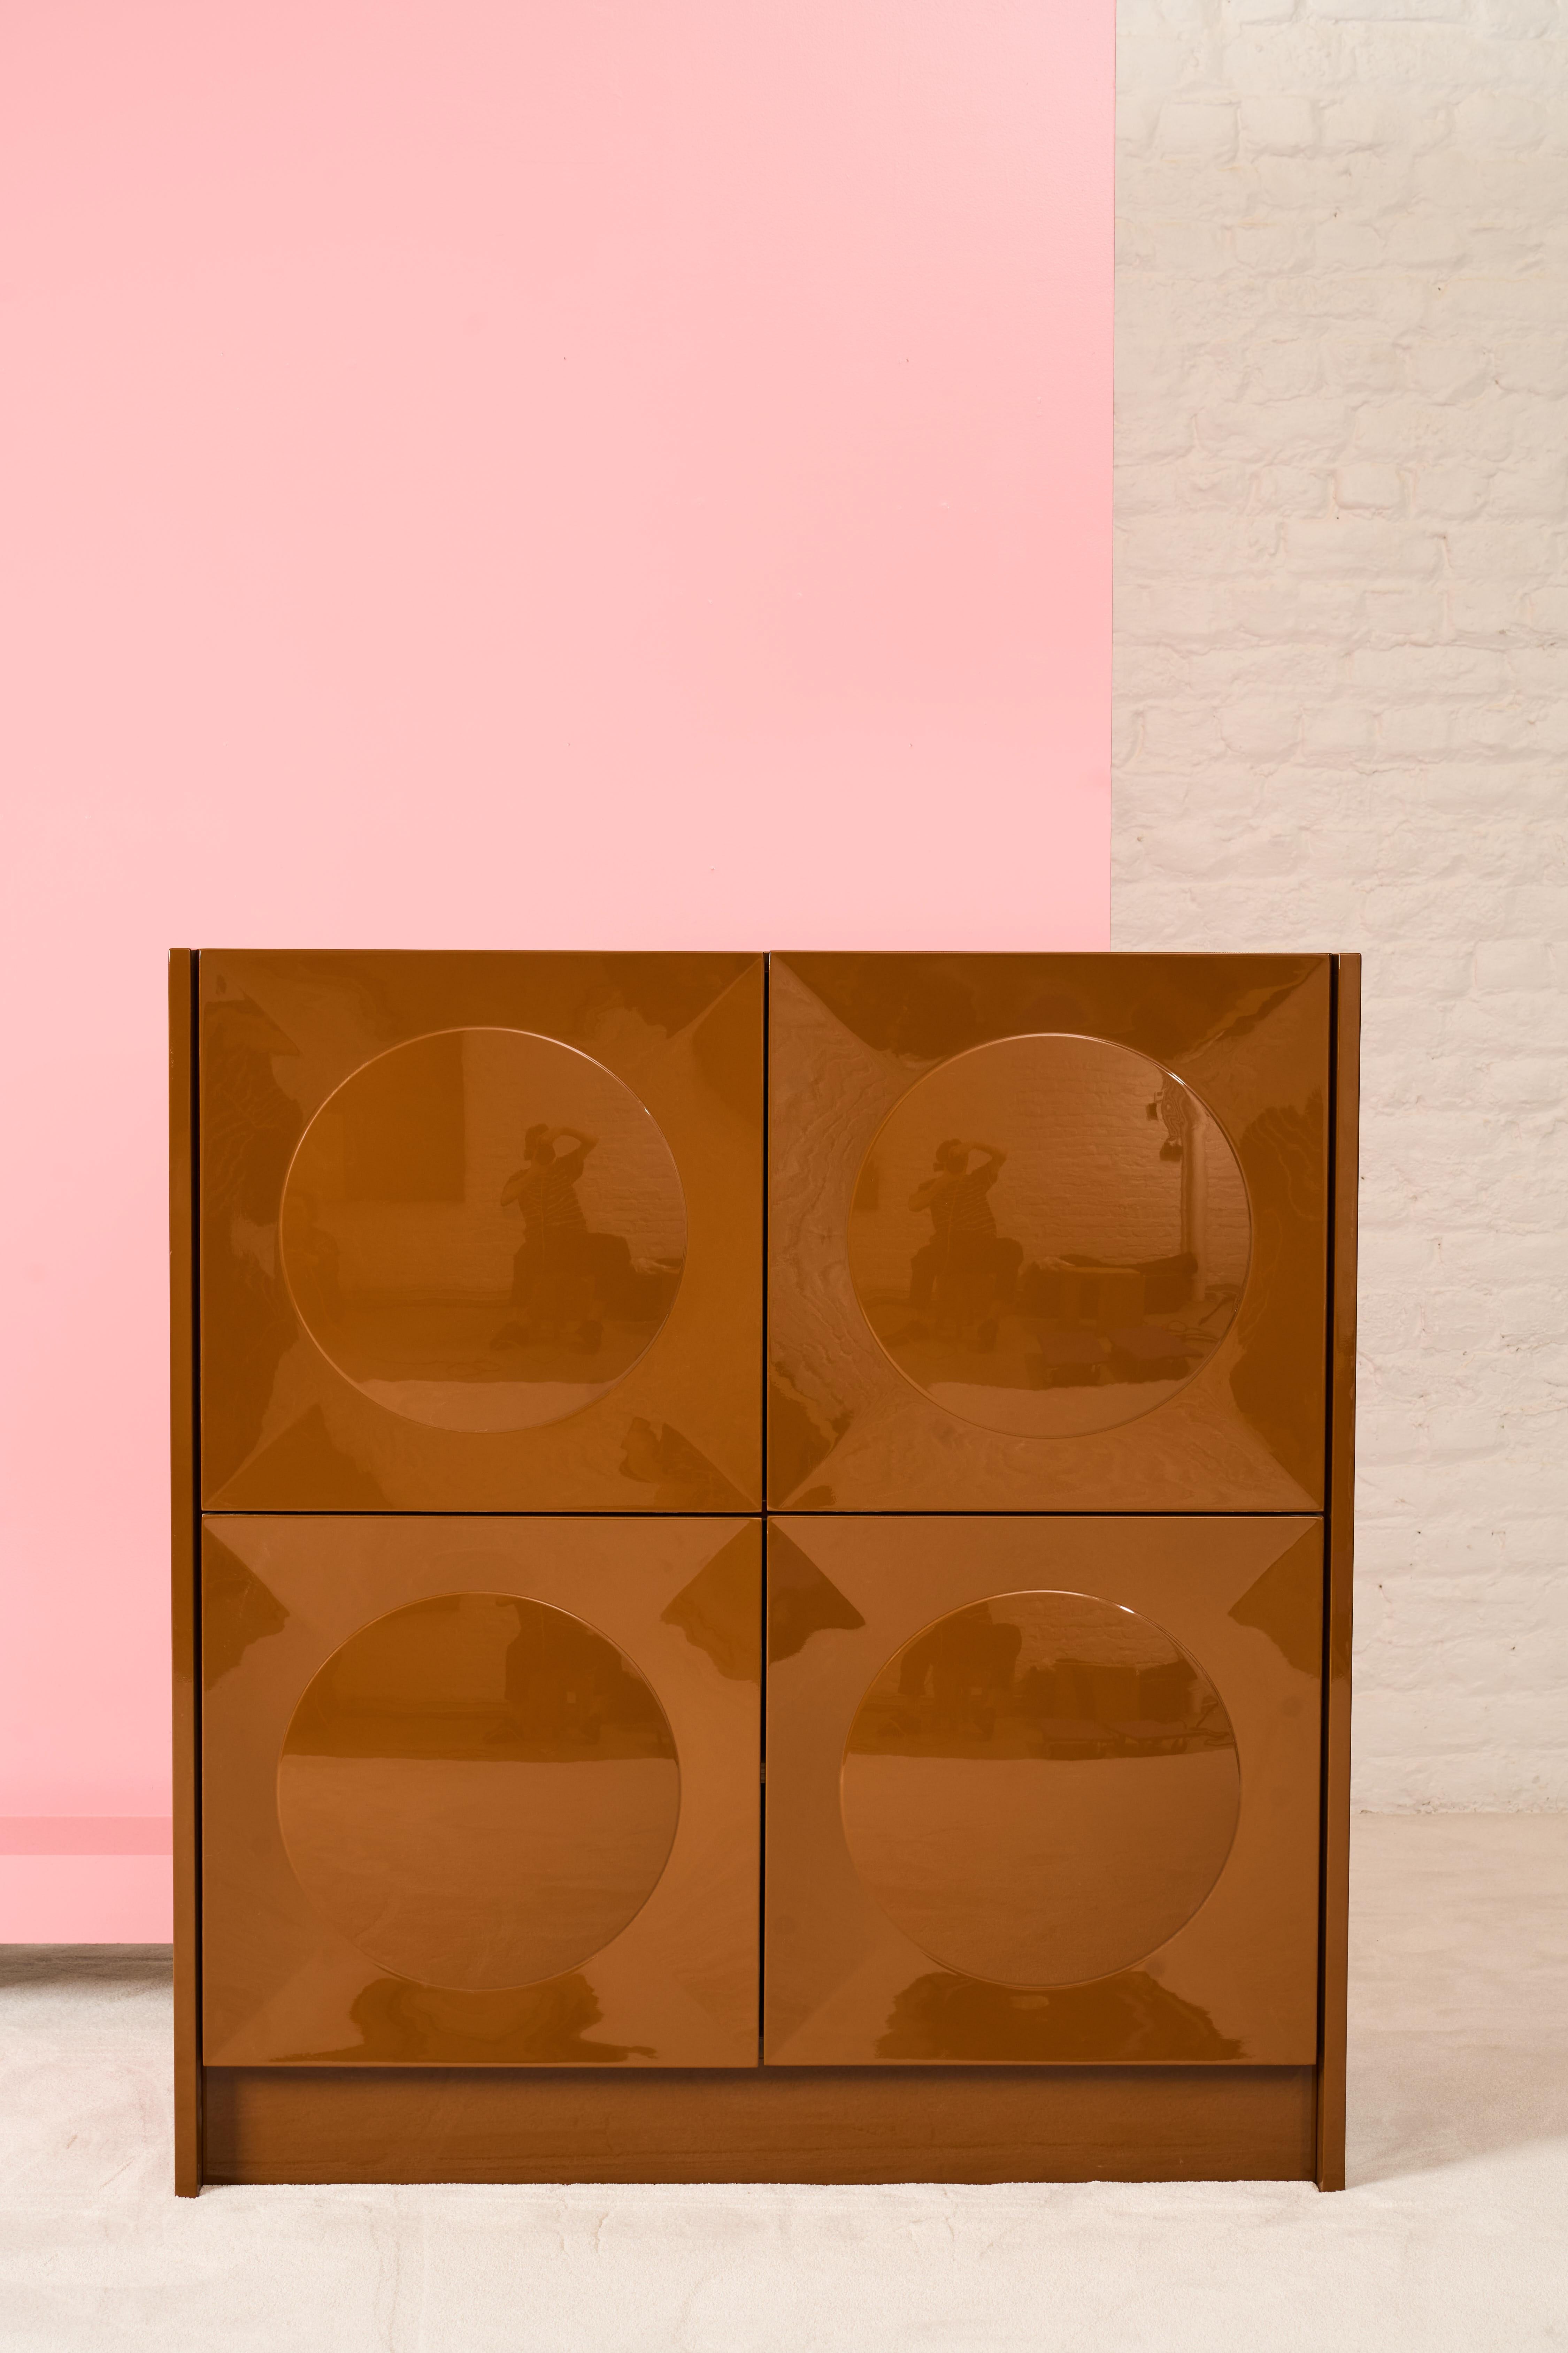 A graphic cabinet from Belgium in the 1970’s. The cabinet has been completely restored and lacquered in a brown color.